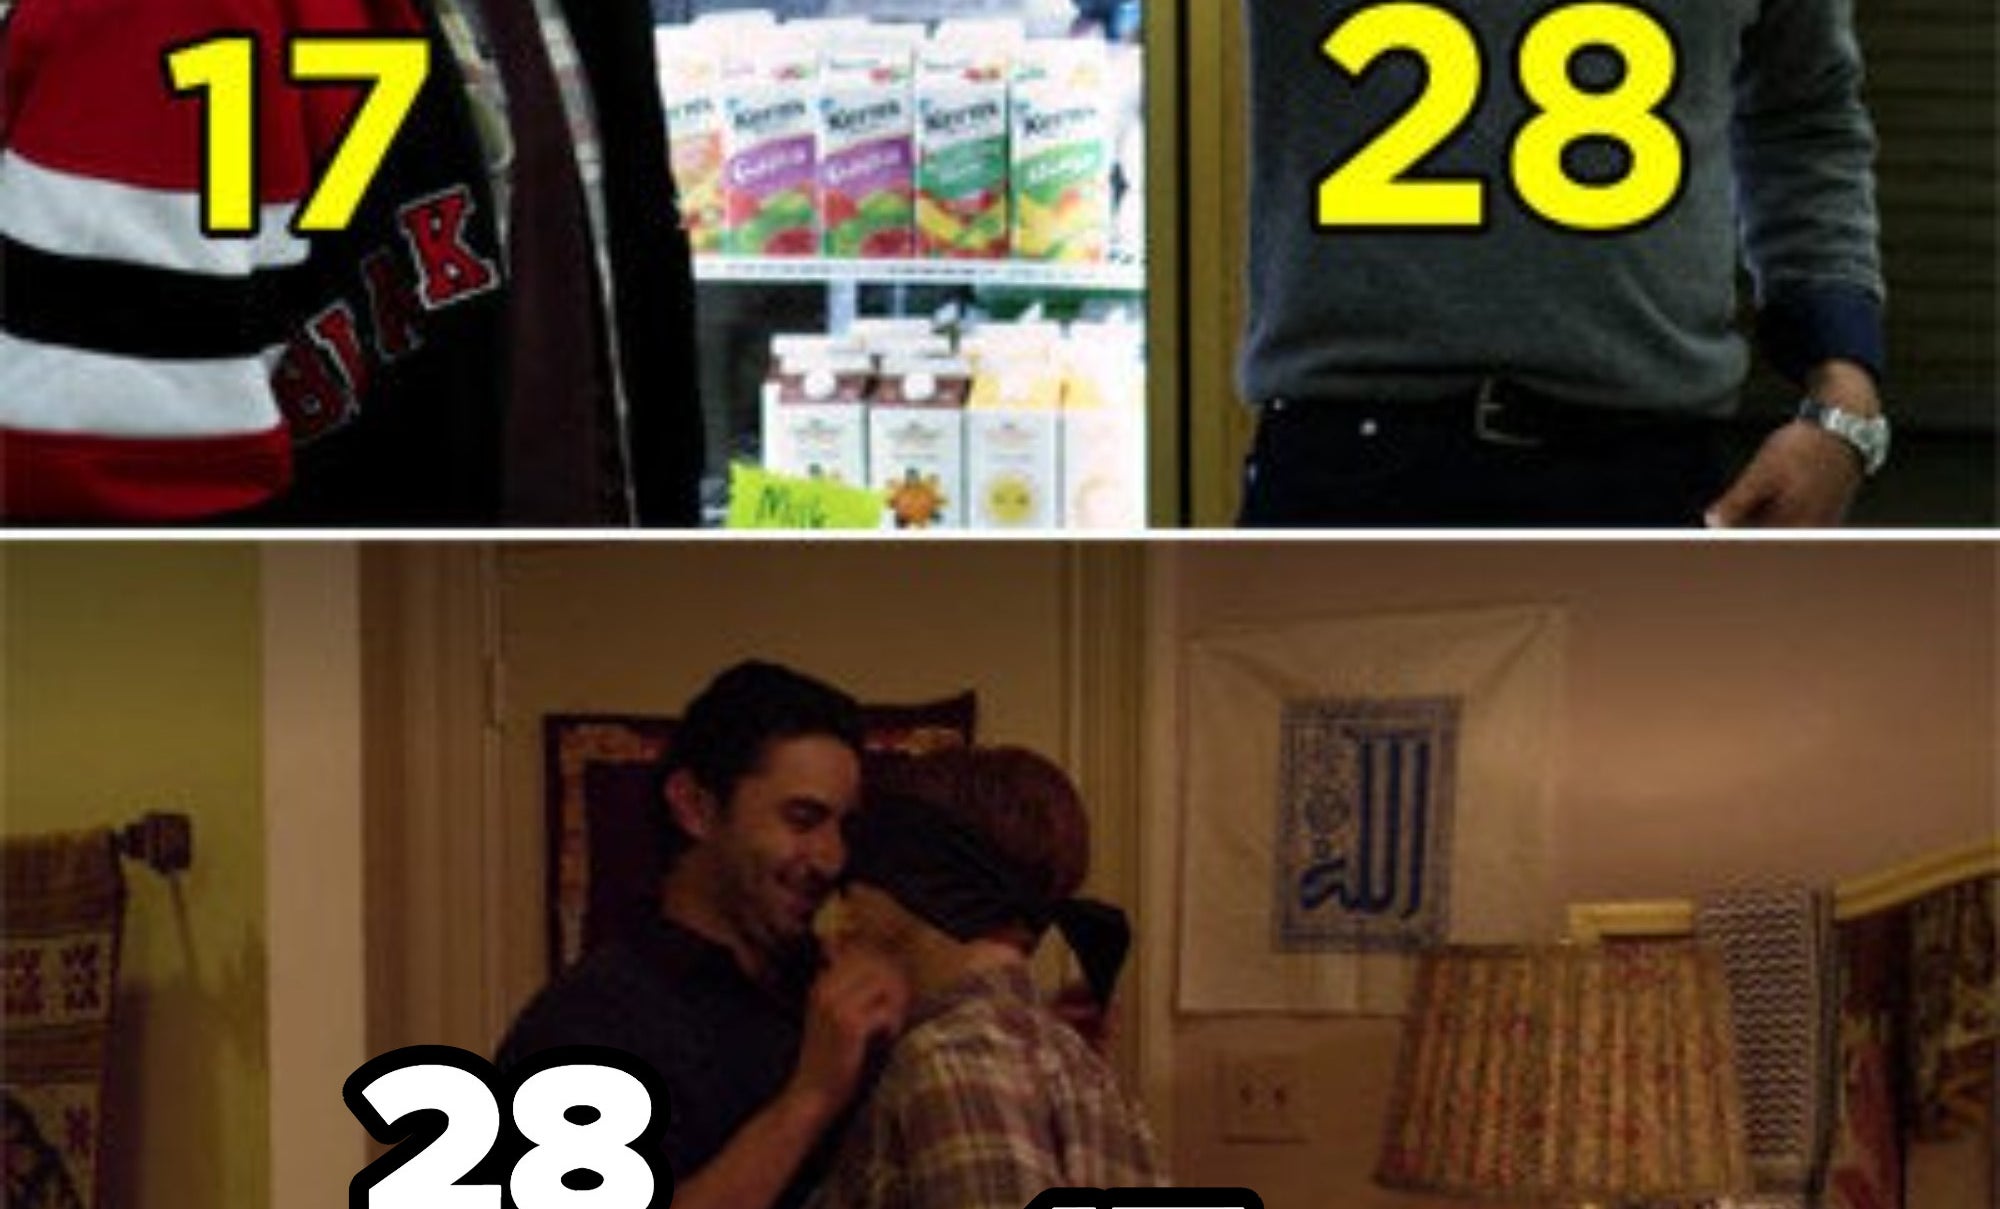 Cameron Monaghan and Pej Vahdat about to kiss in a bedroom in a scene from &quot;Shameless&quot;